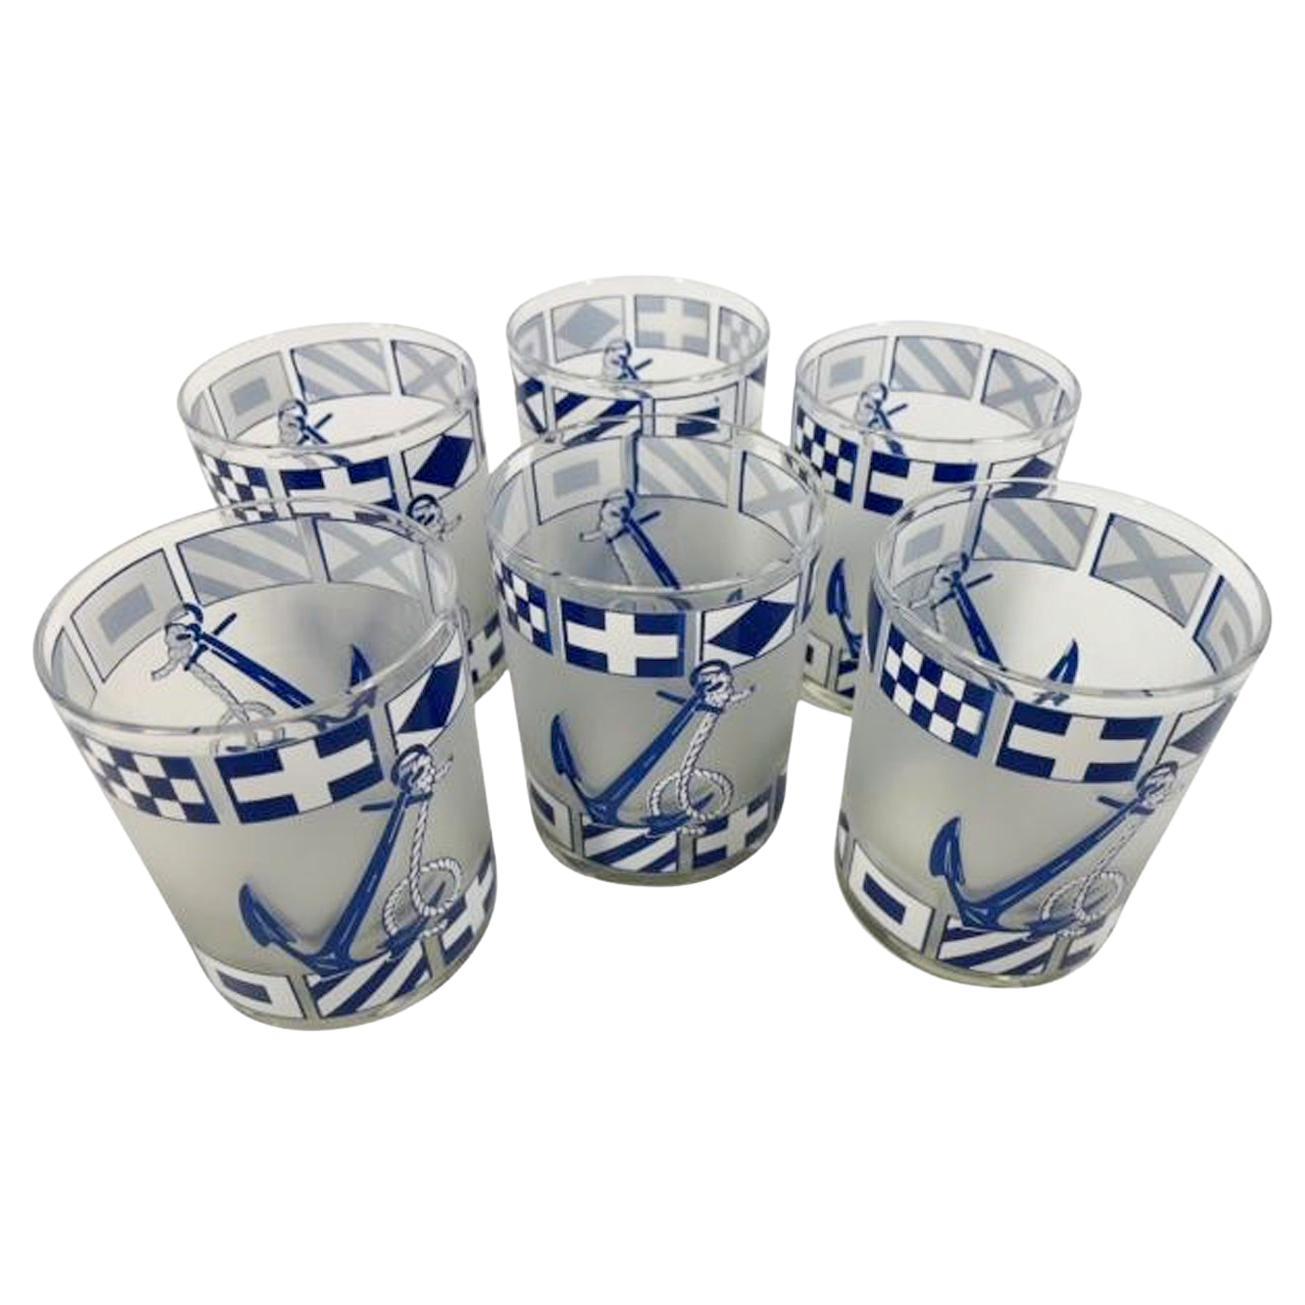 Vintage Culver Frosted Rocks Glasses with Anchors Between Bands of Flags  For Sale